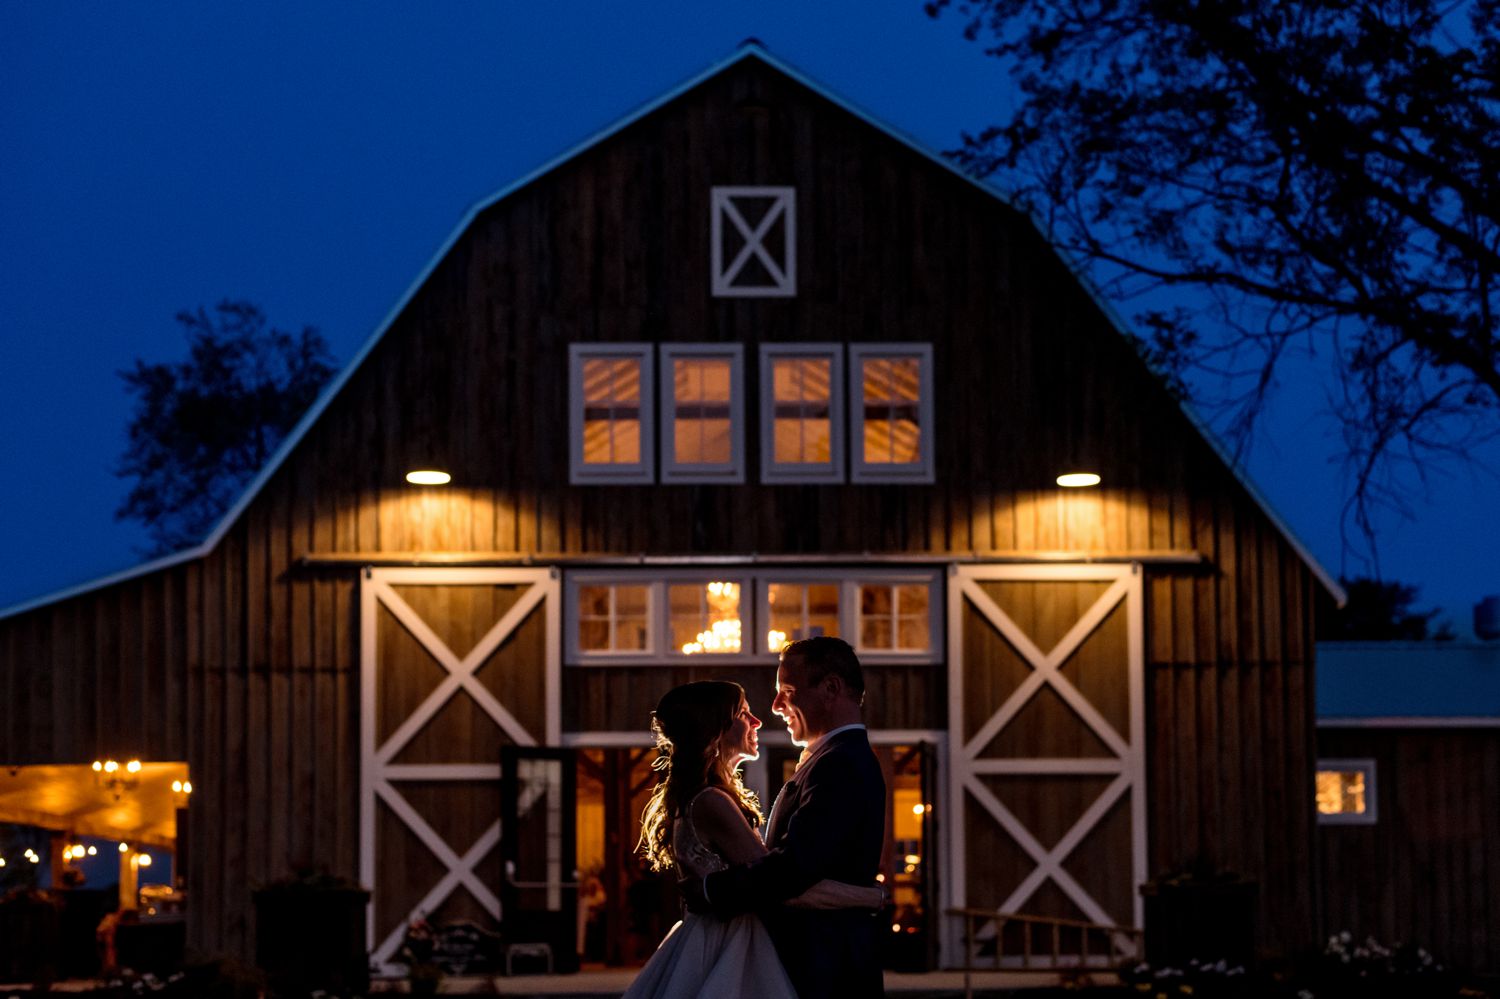 nighttime bride and groom portrait at a wedding at stonefields carleton place ontario (Copy)